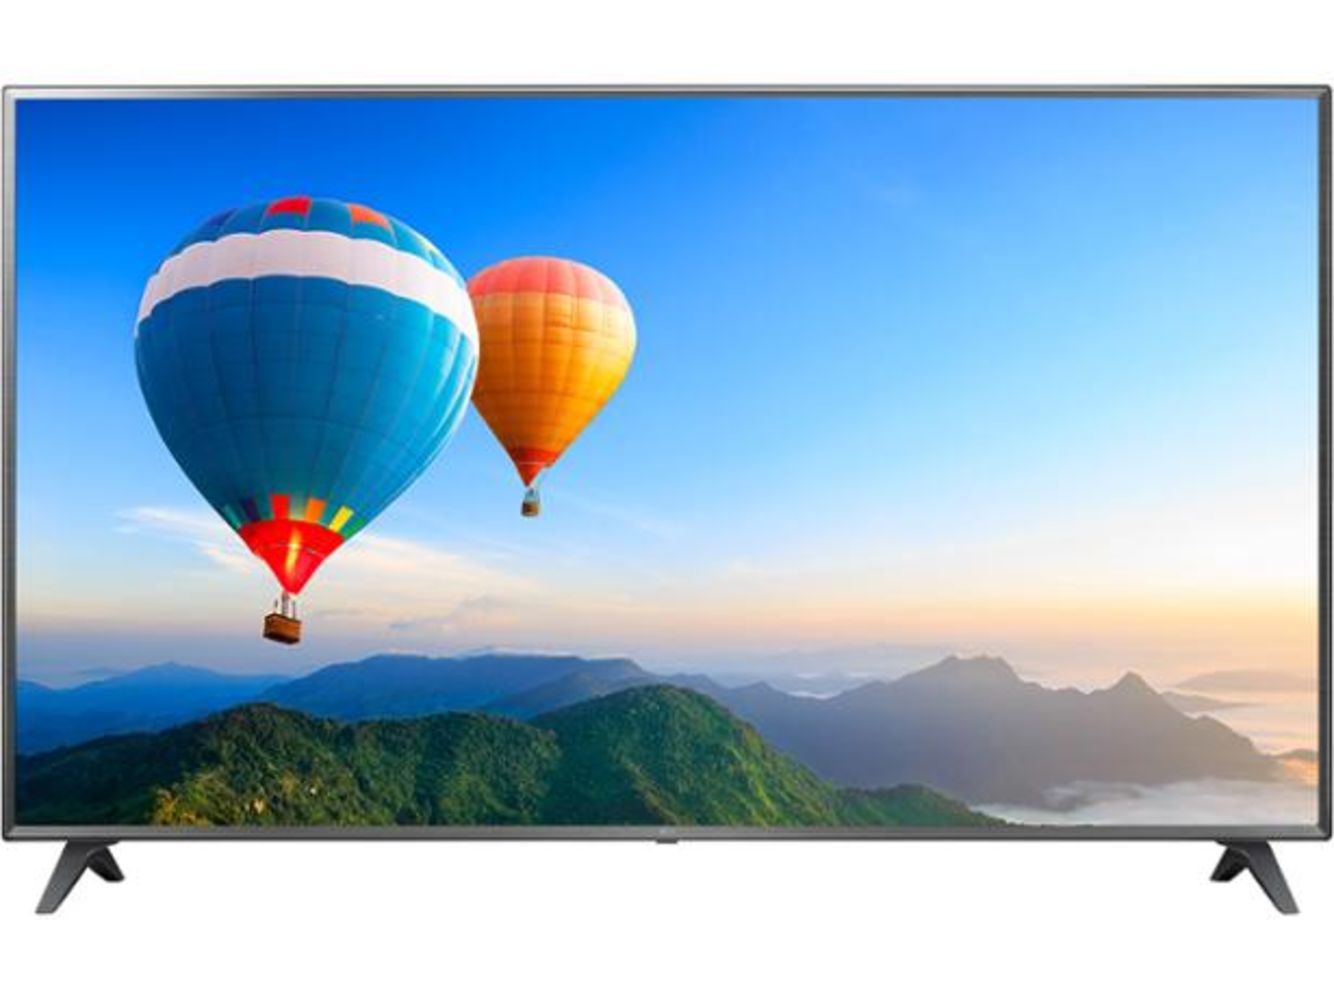 Limited Selection of Big-screen UHD LG TVs, from 55 Inches Upwards!